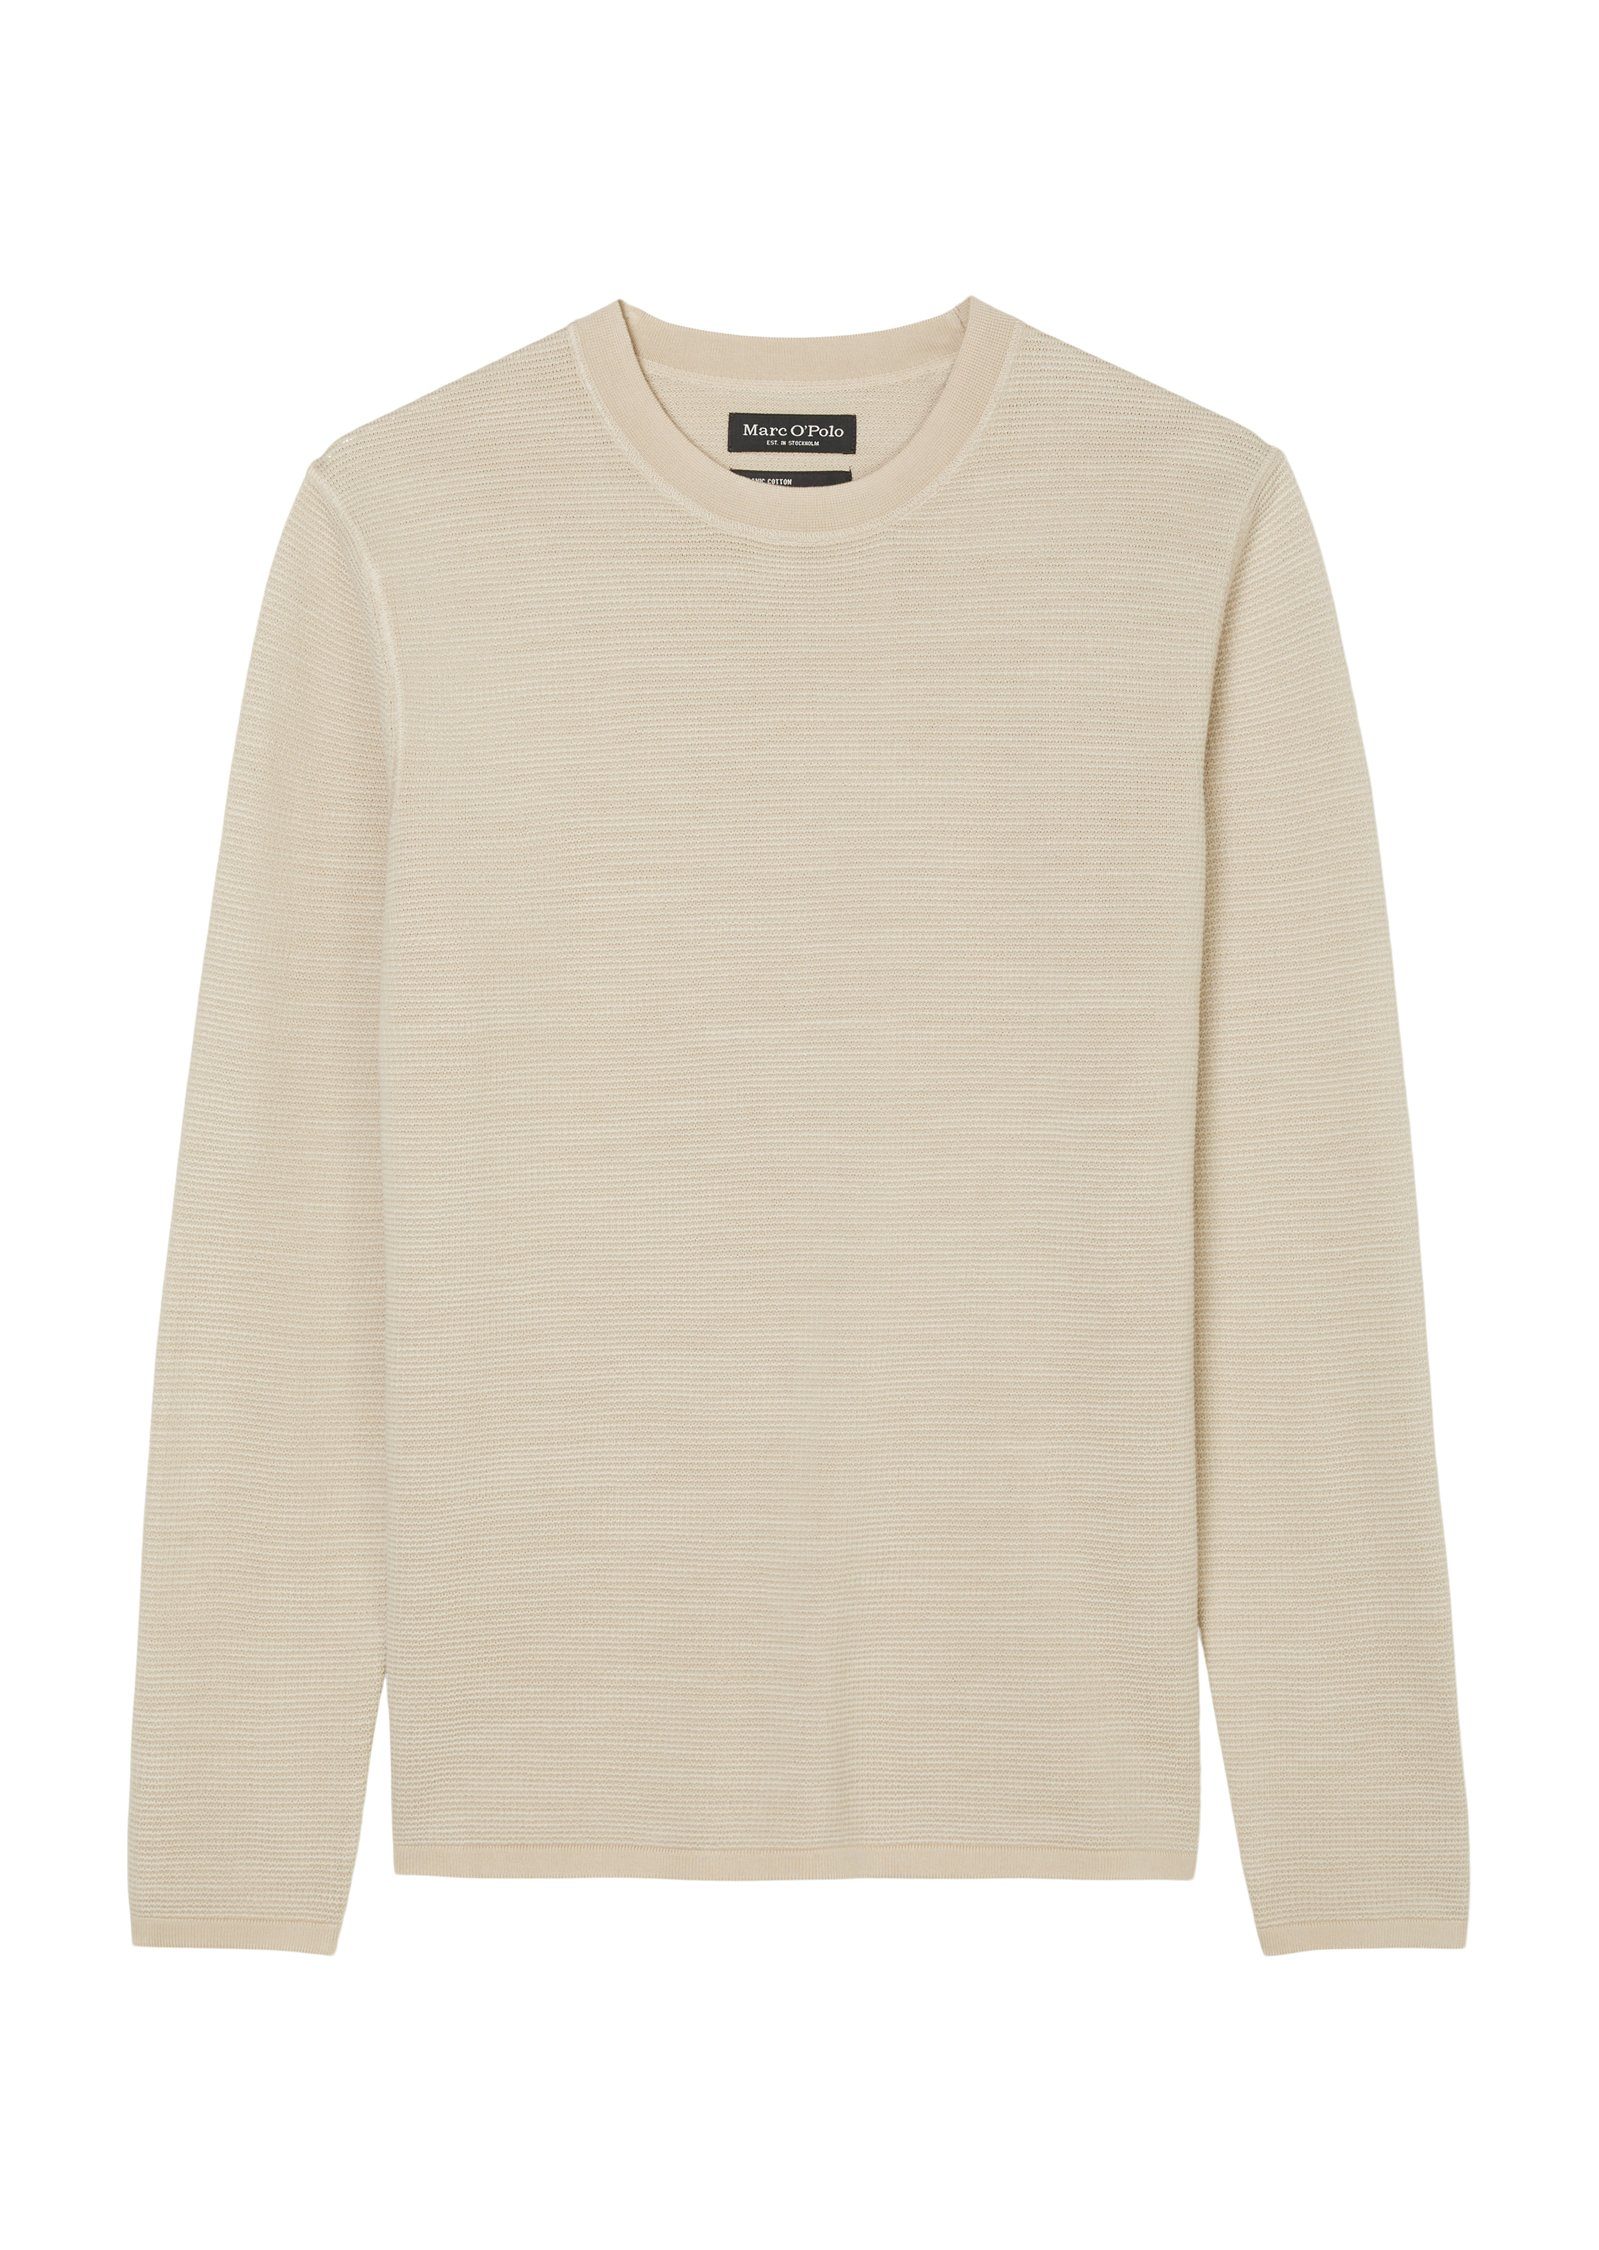 Marc O'Polo Sweatshirt Pullover, crew neck, structure with